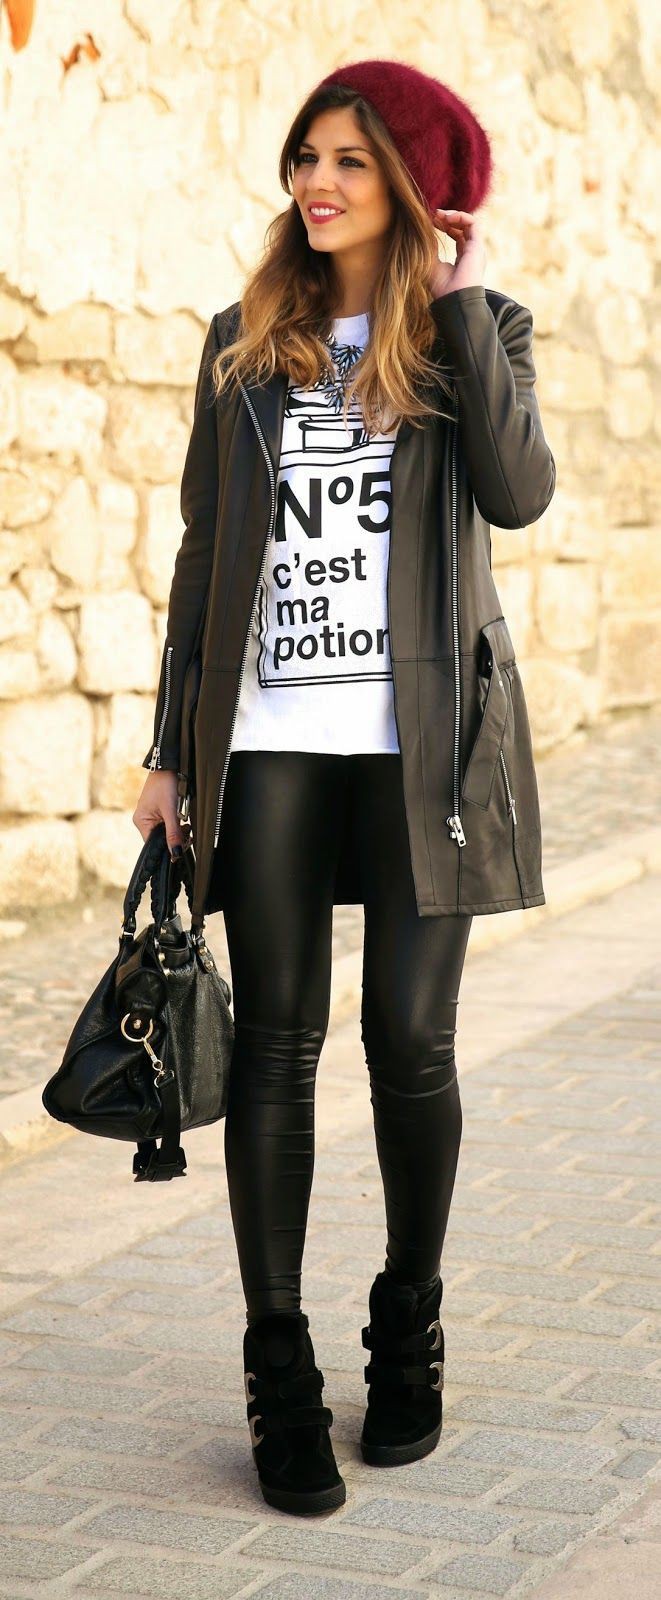 Casual leather leggings outfit: winter outfits,  Leather jacket,  Artificial leather,  Polar fleece,  Preppy Look,  Leather Leggings  